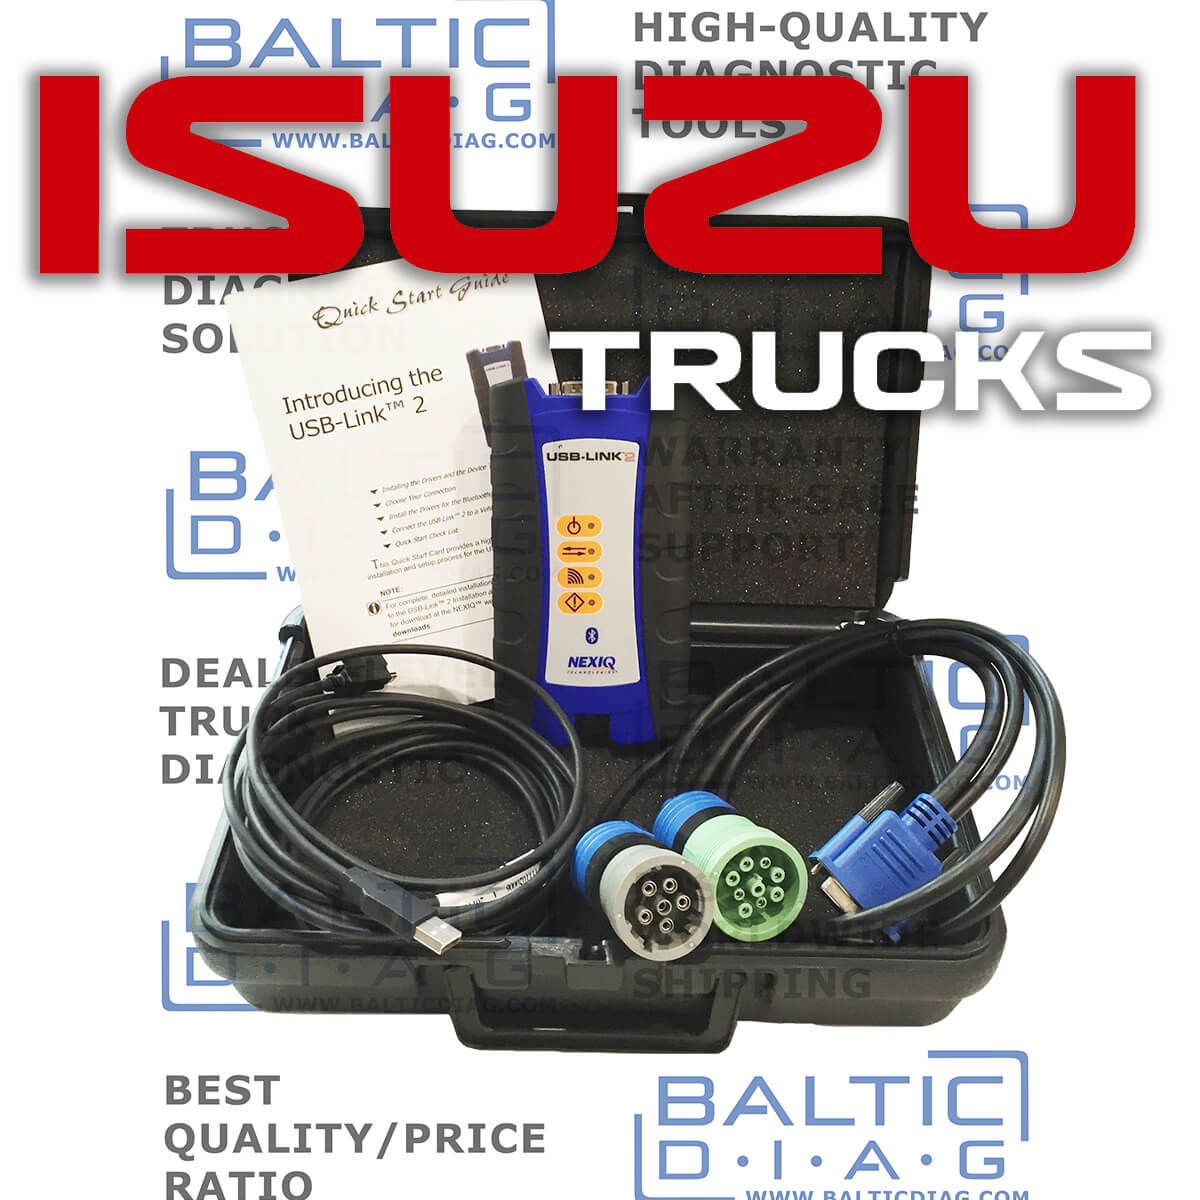 have one to sell? sell now isuzu idss ii 2 truck diagnostic scanner with original usb